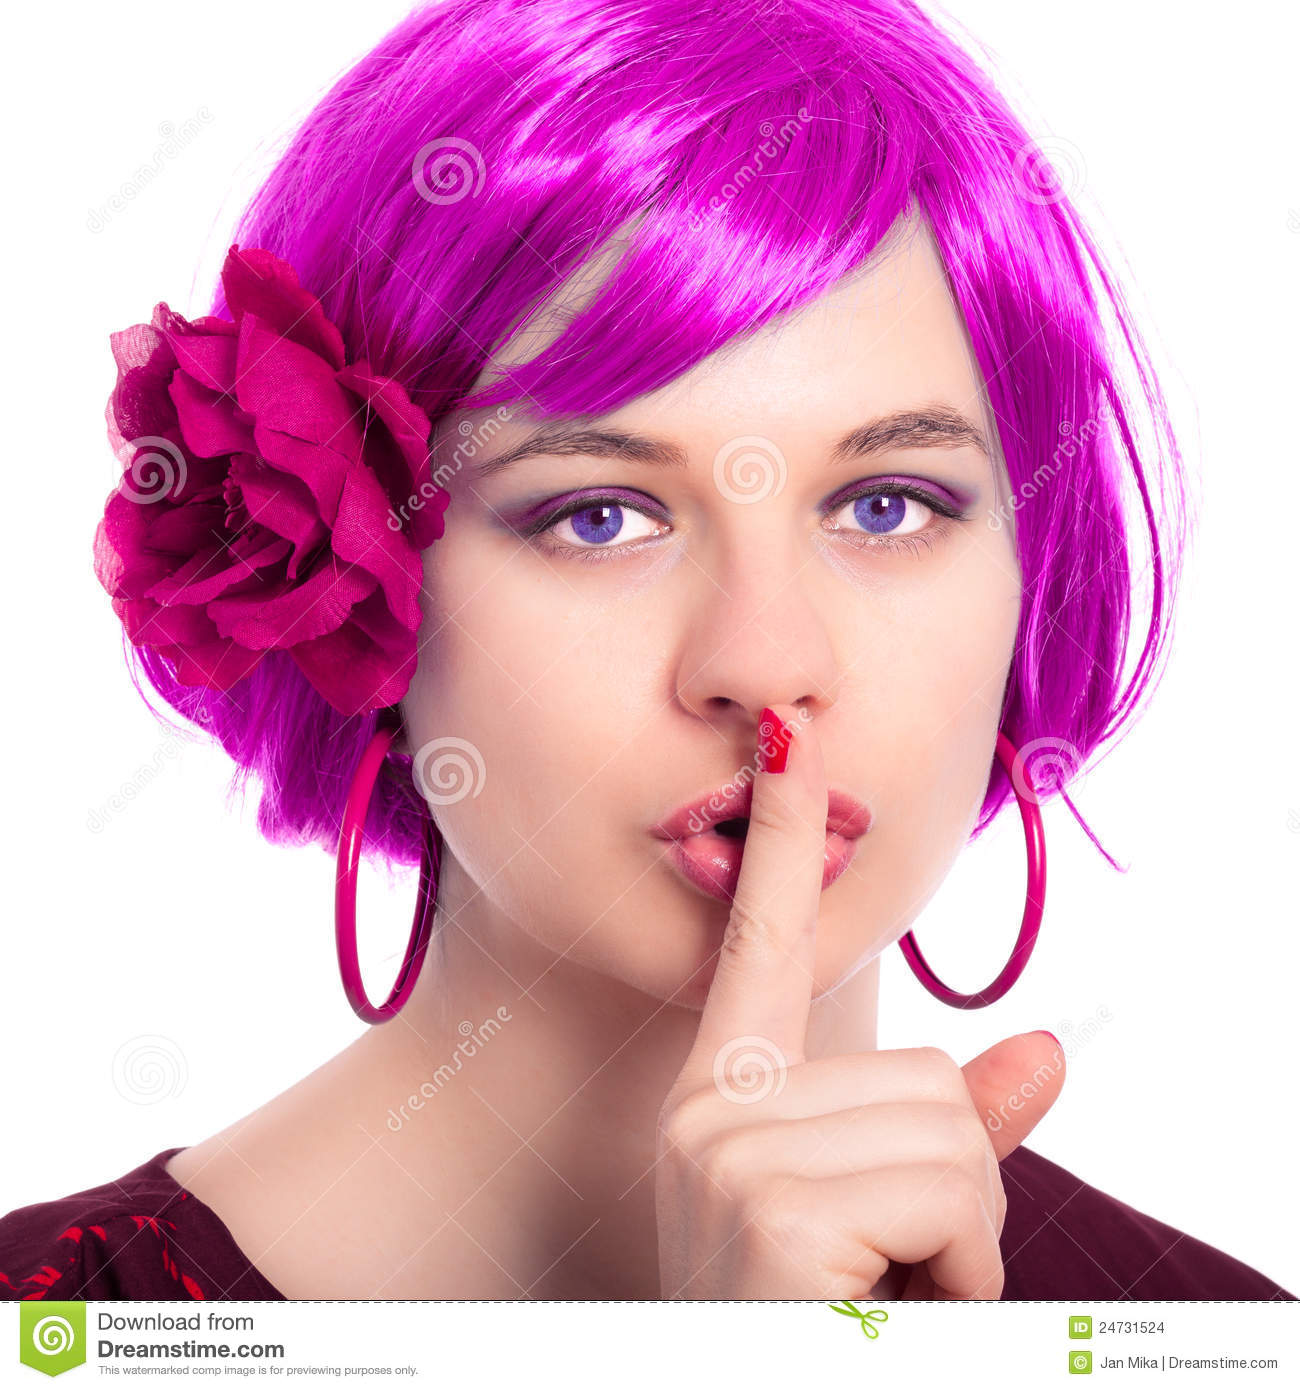 Beautiful Woman In Pink Wig Gesturing Silence Stock Images   Image    